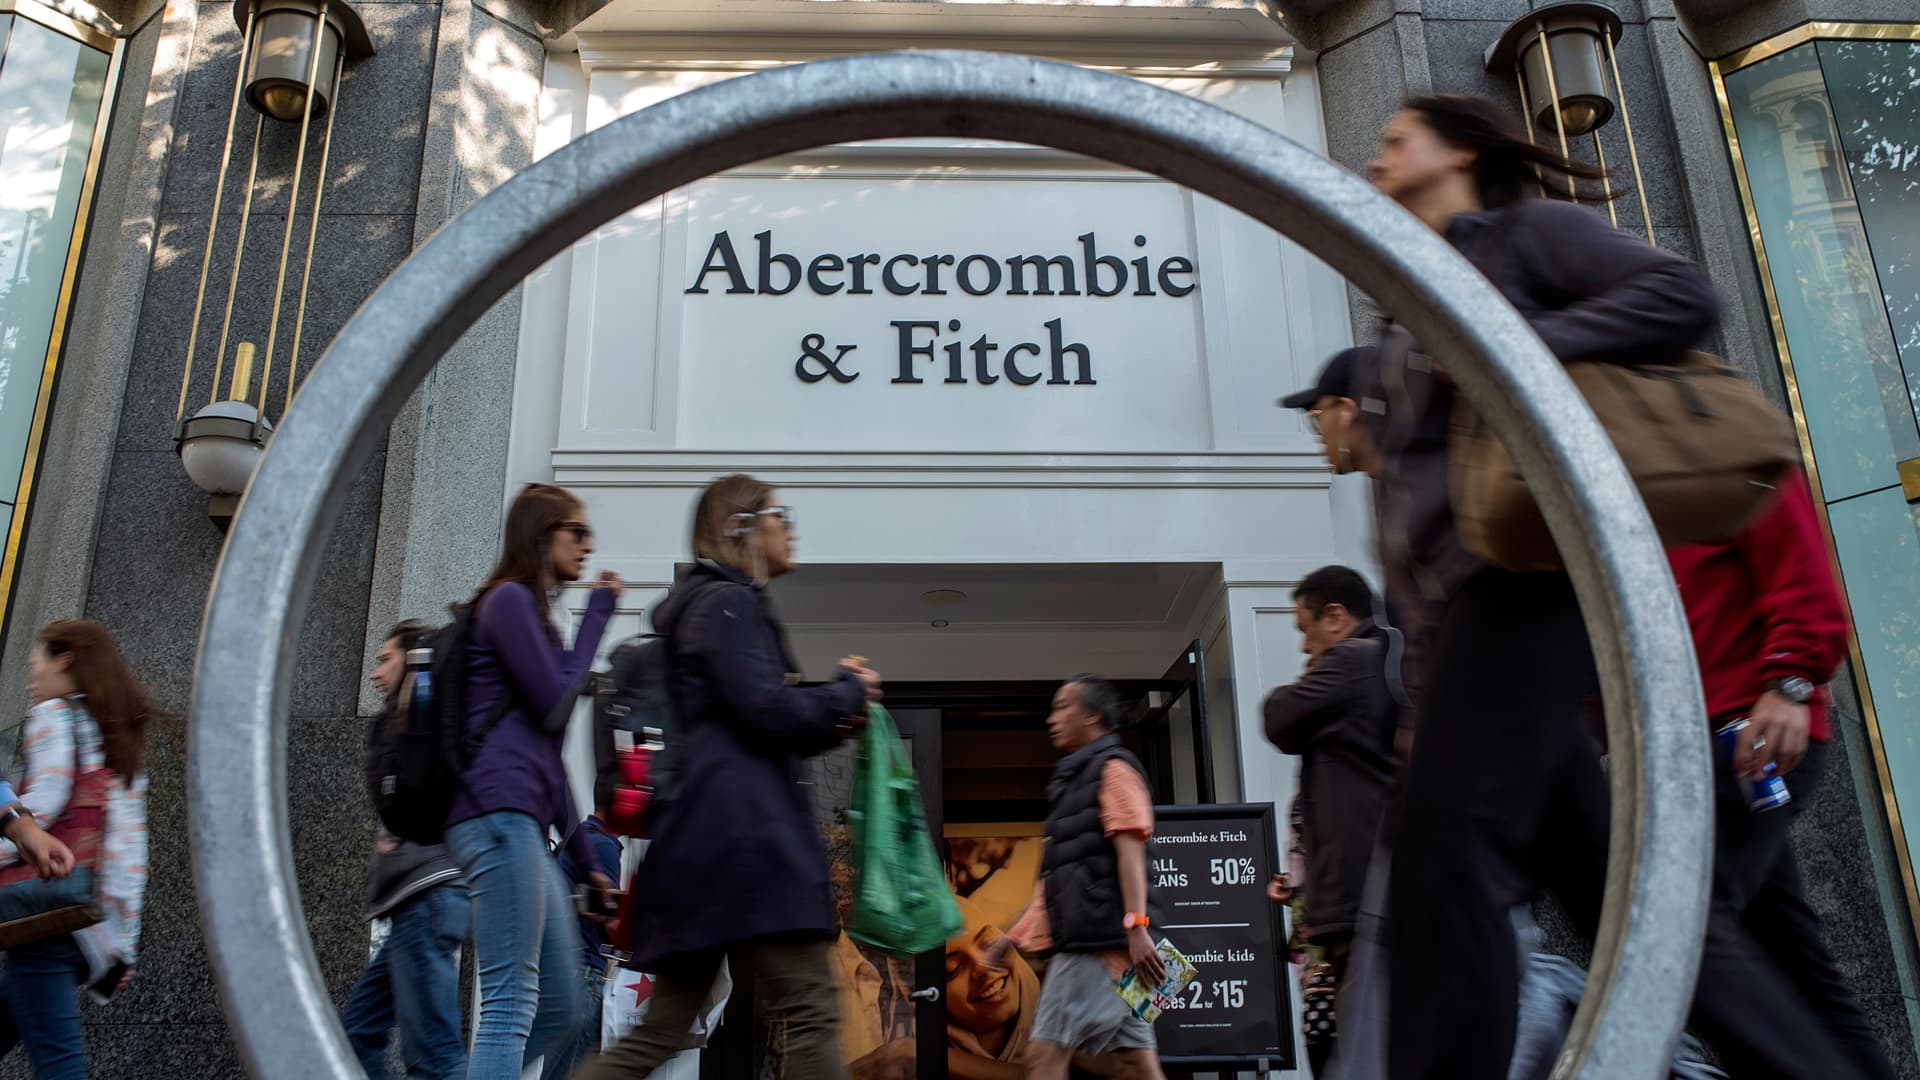 Abercrombie & Fitch surges 18% after reporting surprise profit